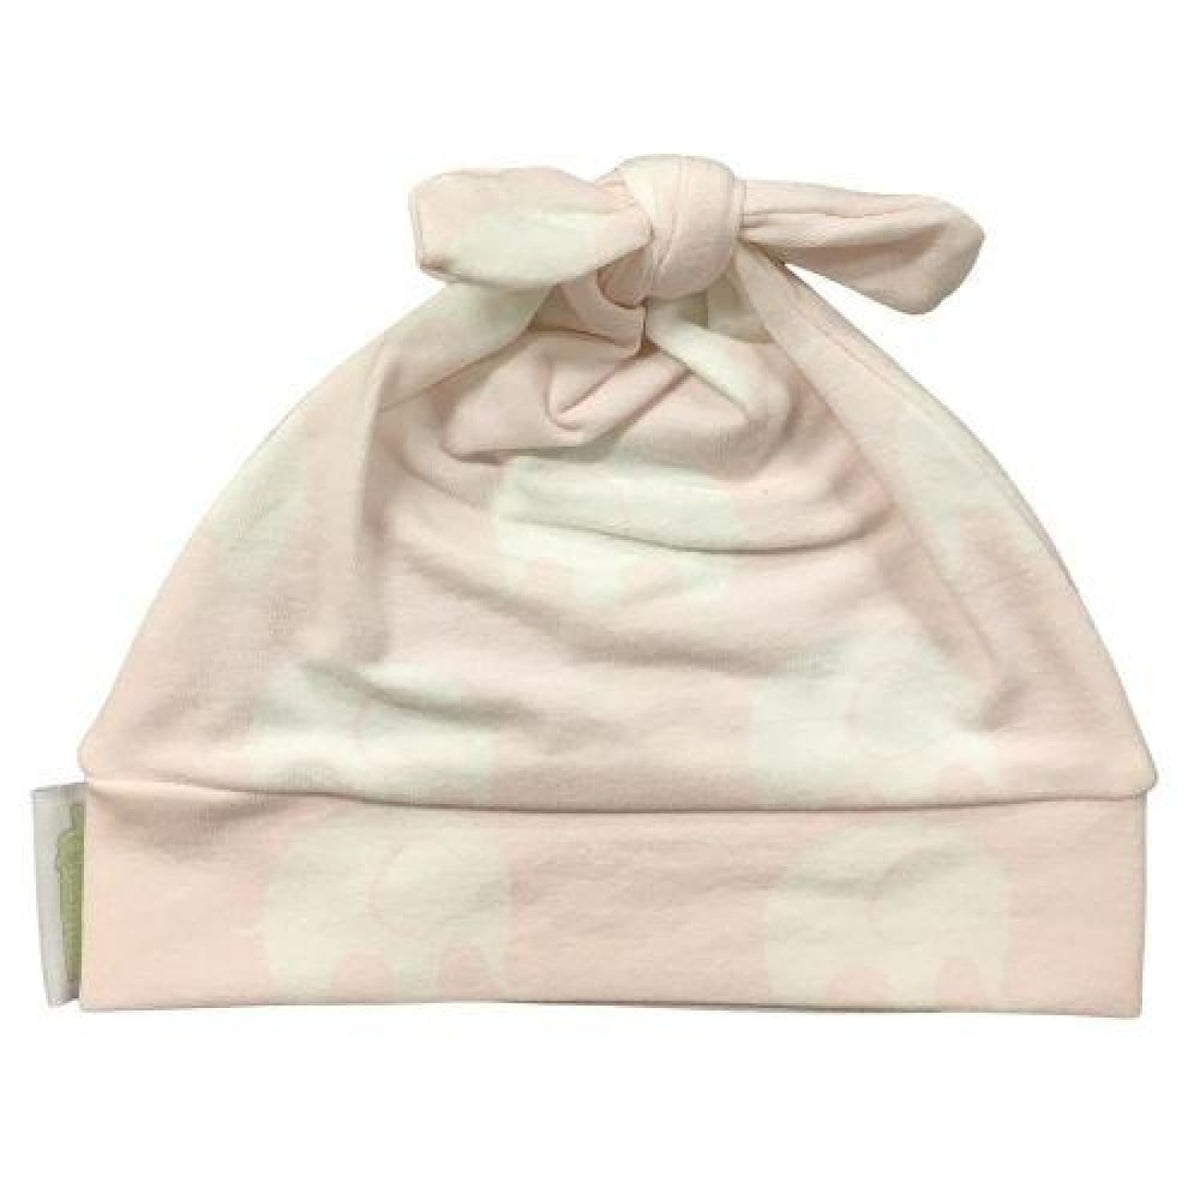 Woombie Cotton Beanie - Pink Elephant 0-6M - 0-6m / Pink Elephant - BABY &amp; TODDLER CLOTHING - BEANIES/HATS